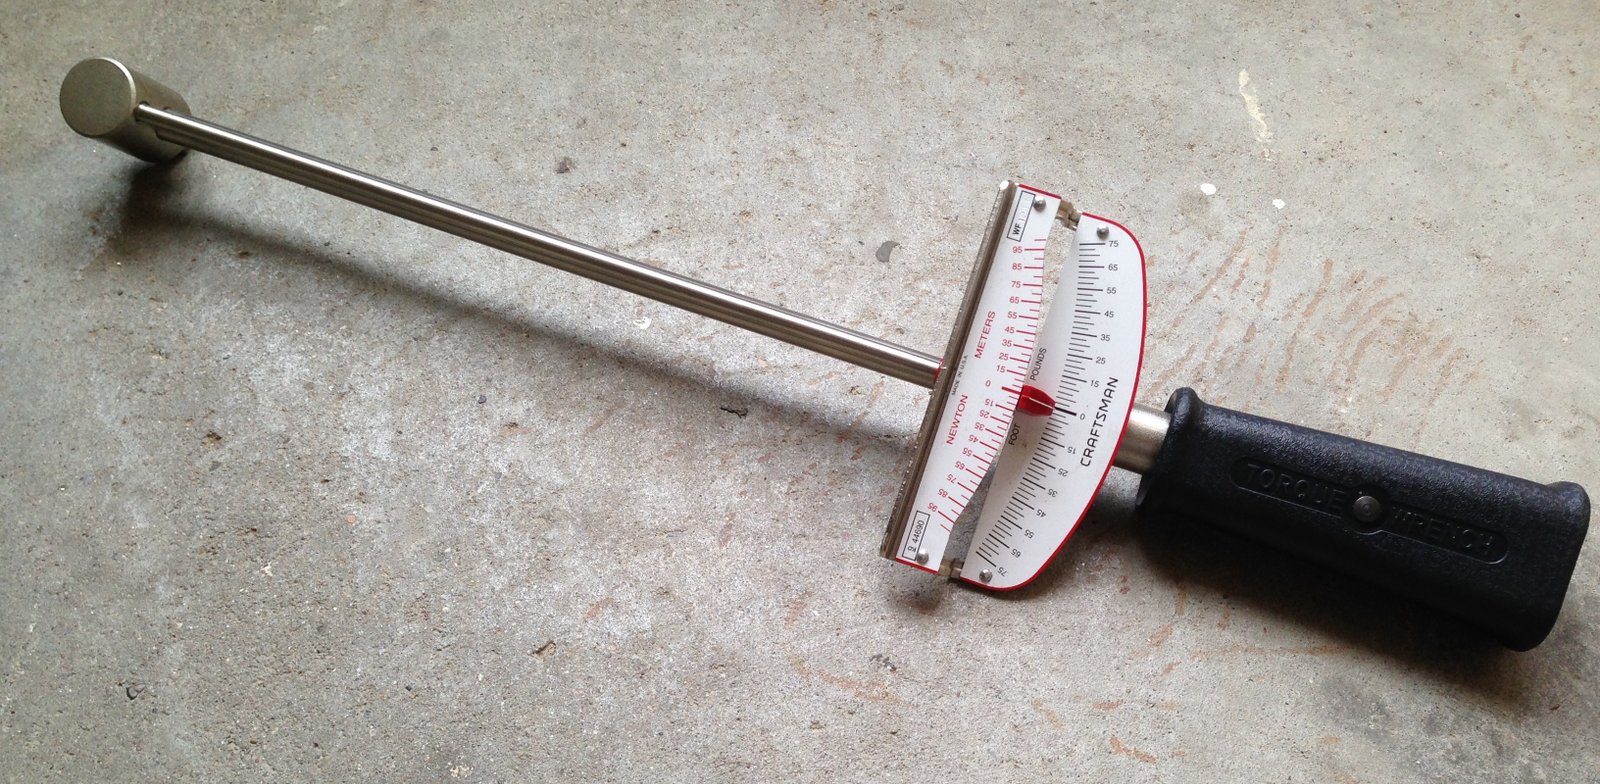 Exploring the Best Household Materials for Crafting a Tension Wrench